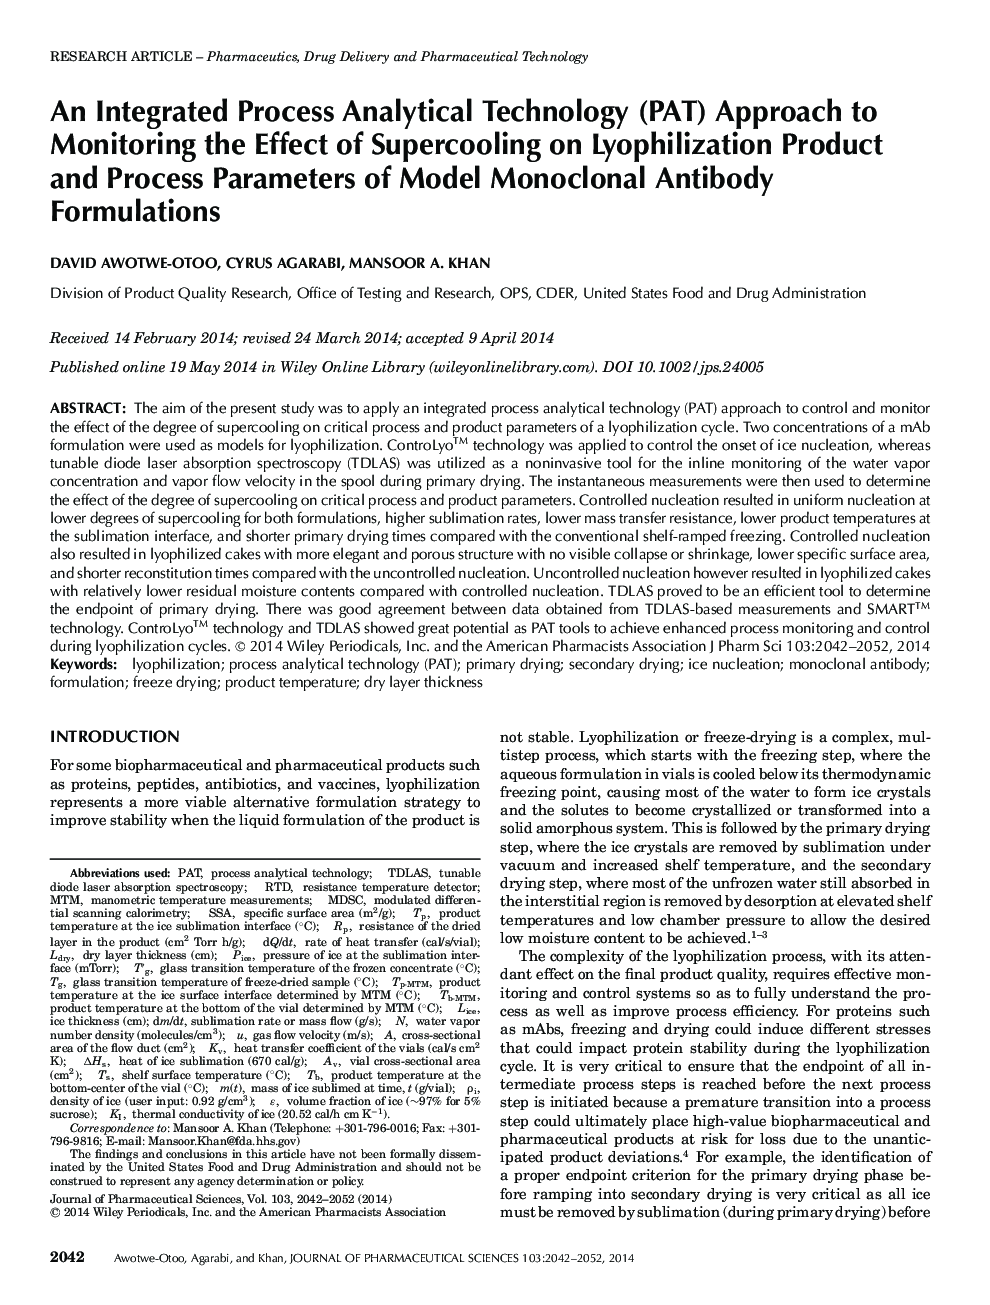 An Integrated Process Analytical Technology (PAT) Approach to Monitoring the Effect of Supercooling on Lyophilization Product and Process Parameters of Model Monoclonal Antibody Formulations